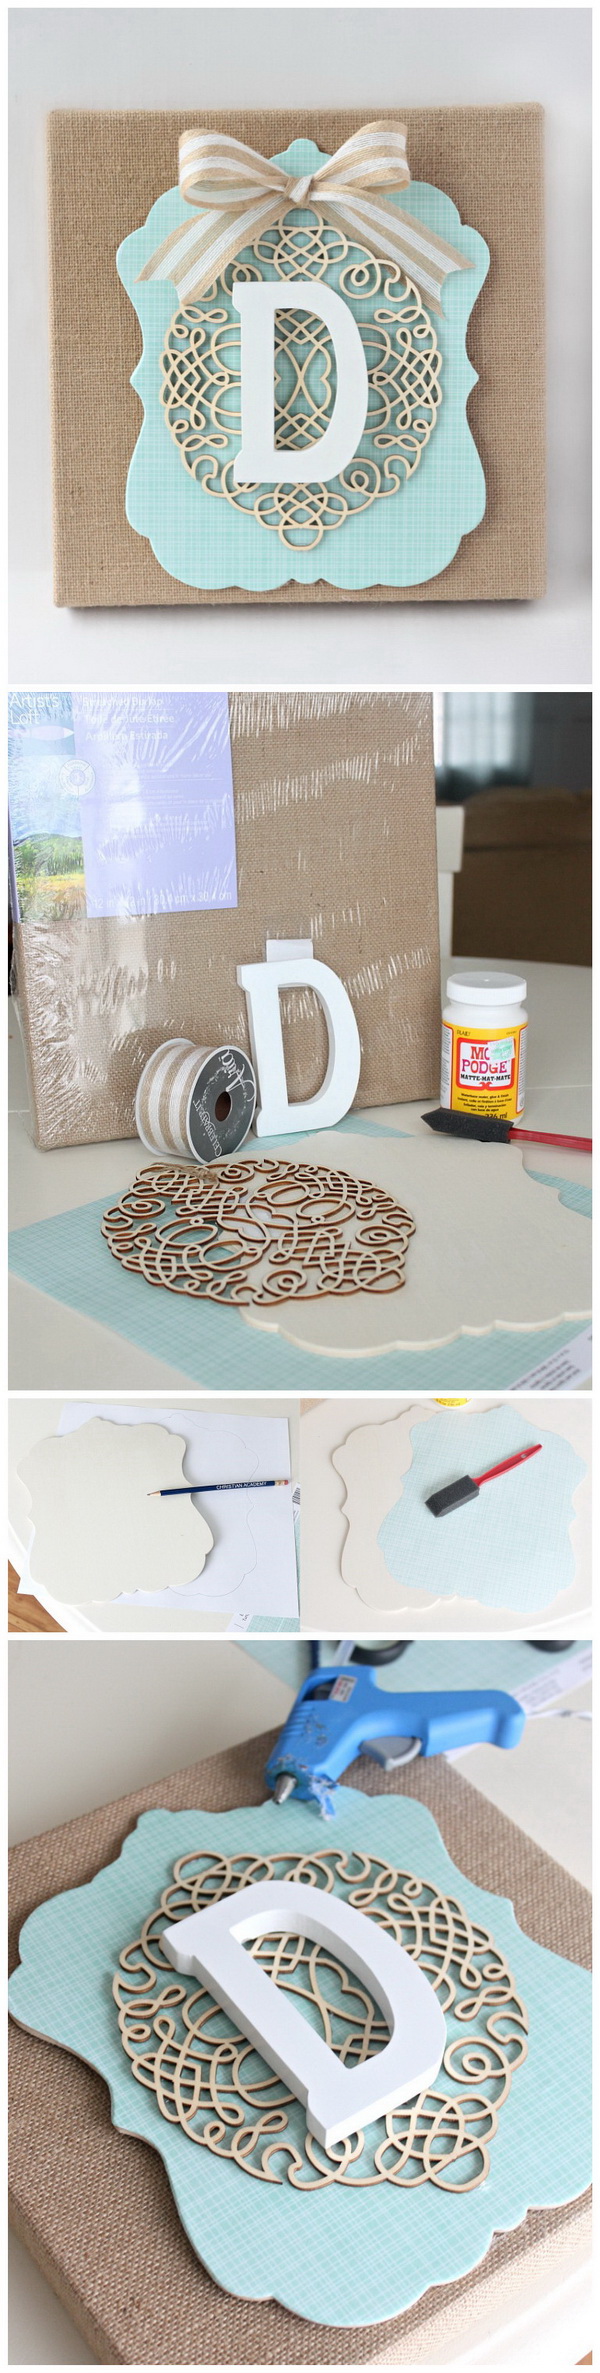 DIY Layered Burlap Monogram. This layered burlap monogram adorns a wall, table or shelf in any room; teens can make their own to add a touch of style to their own room decor.